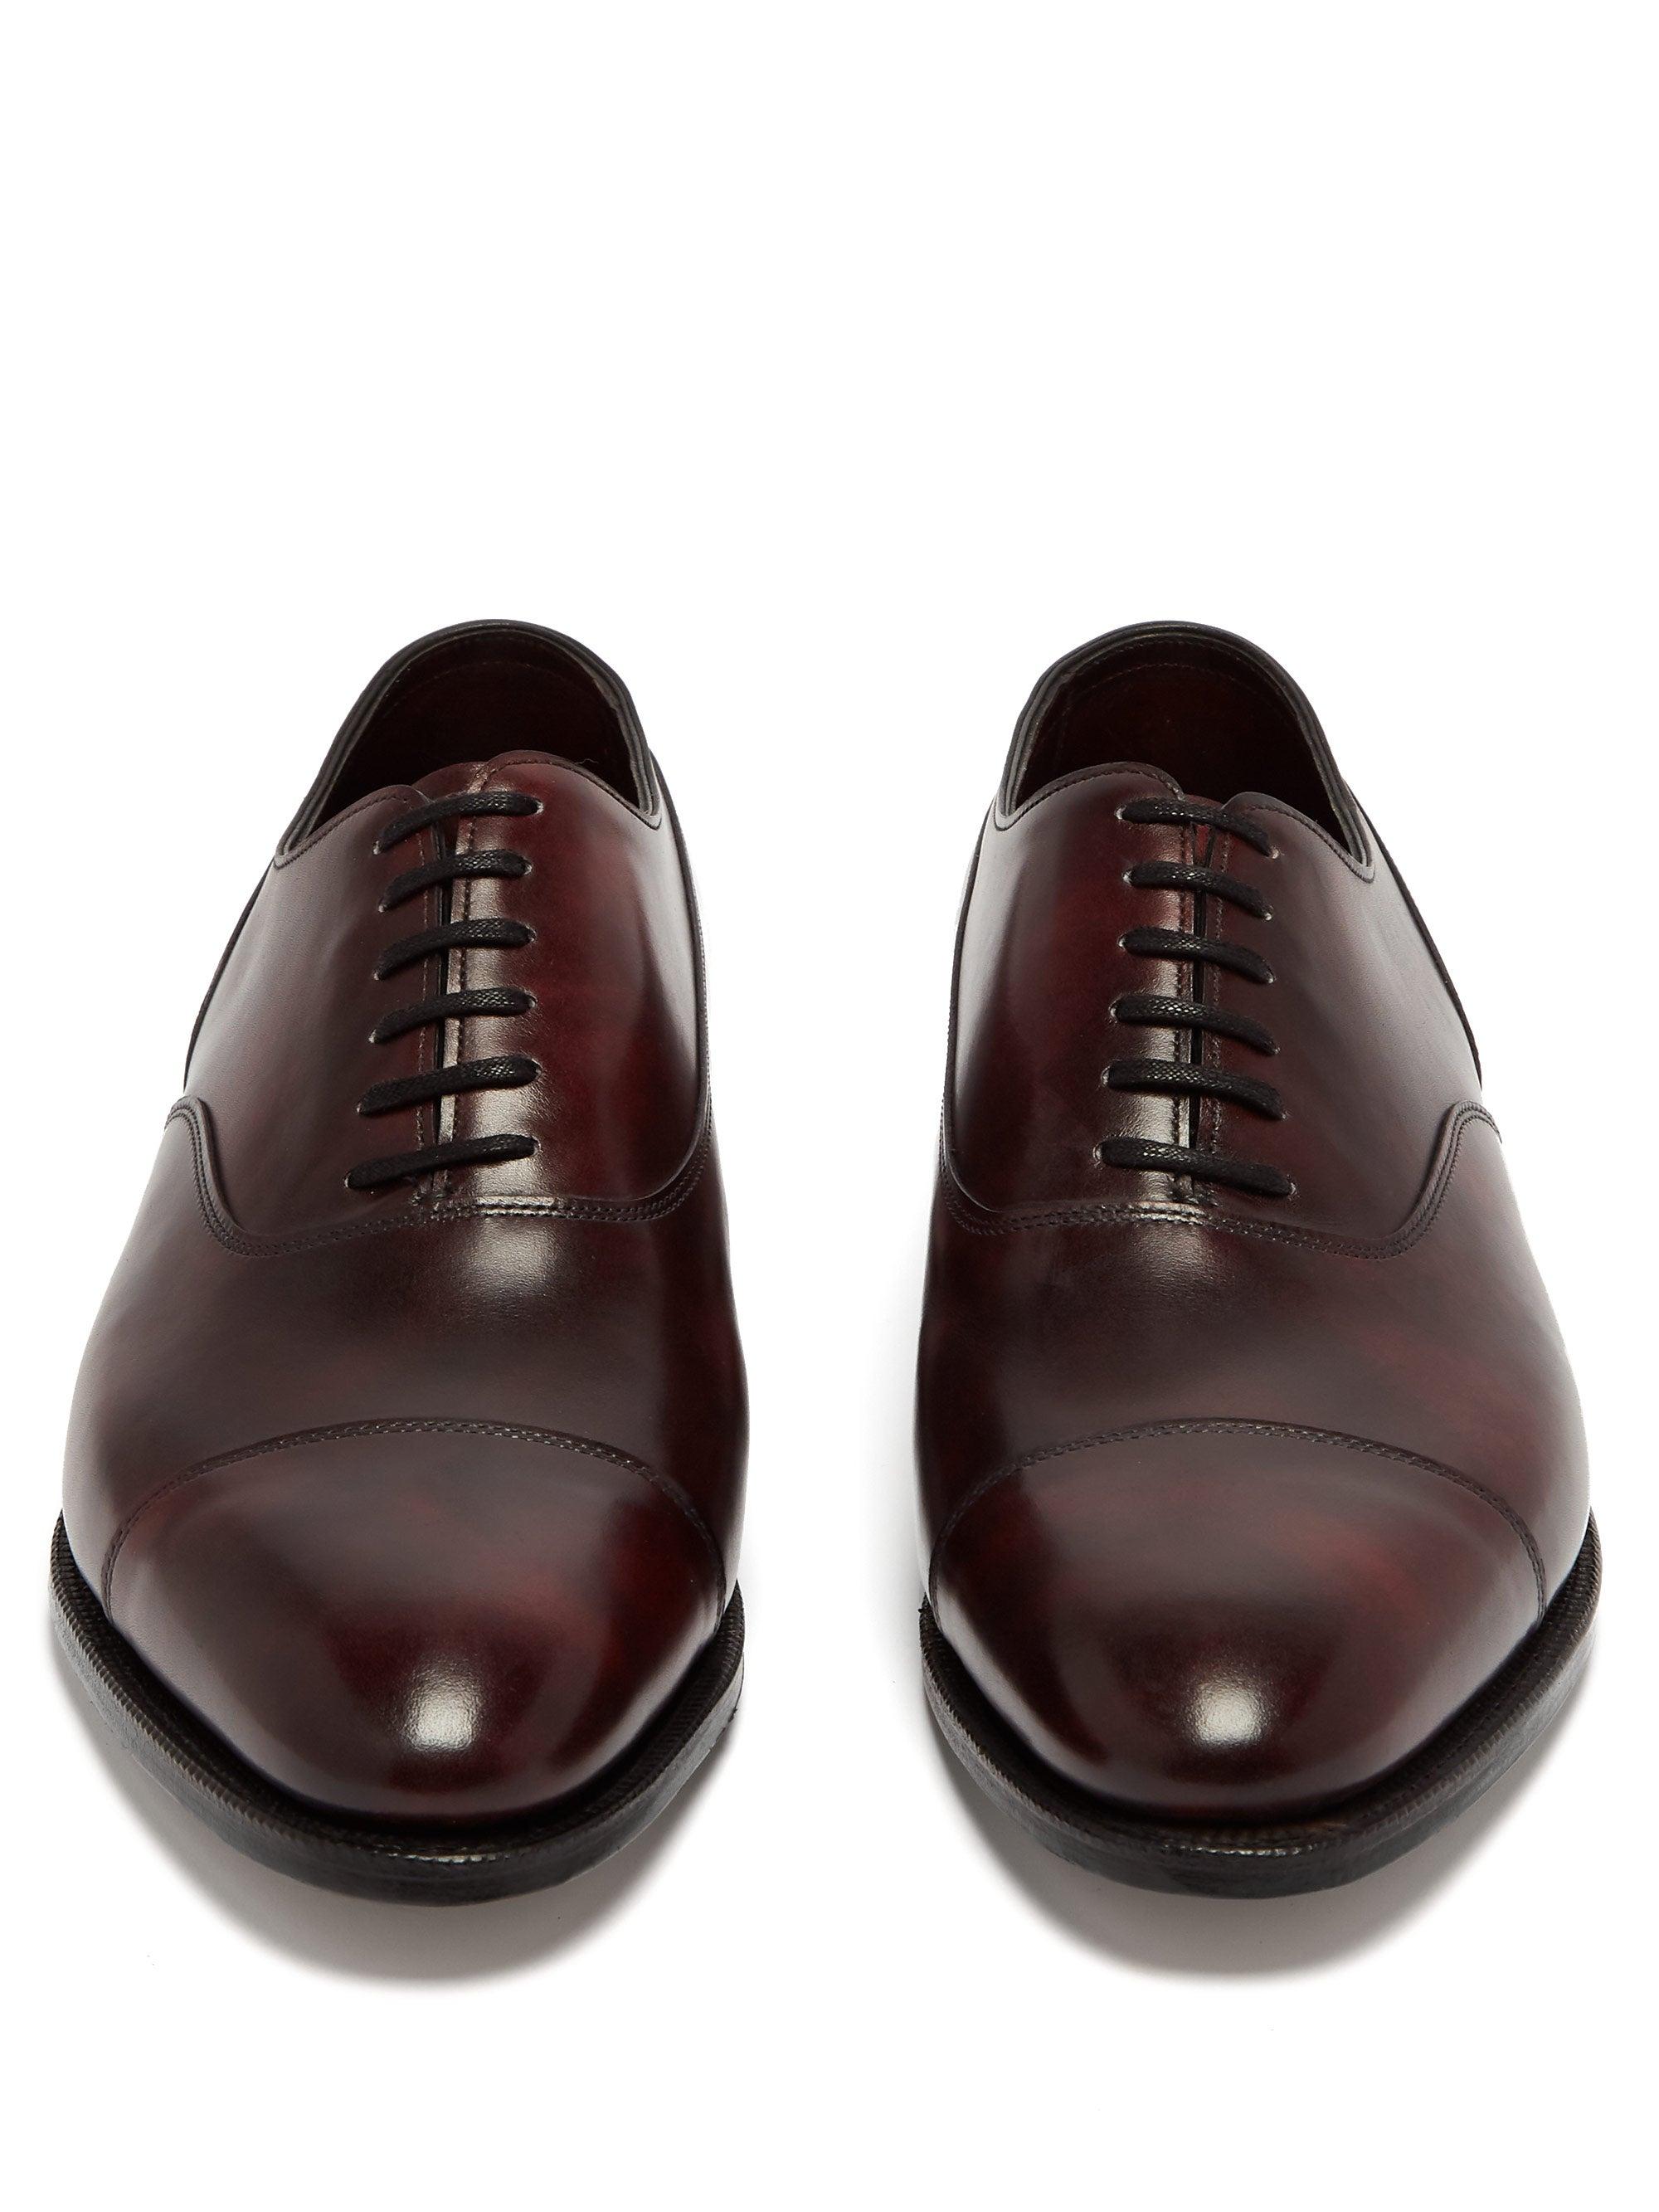 John Lobb Alford Museum Leather Oxford Shoes in Burgundy (Brown) for ...